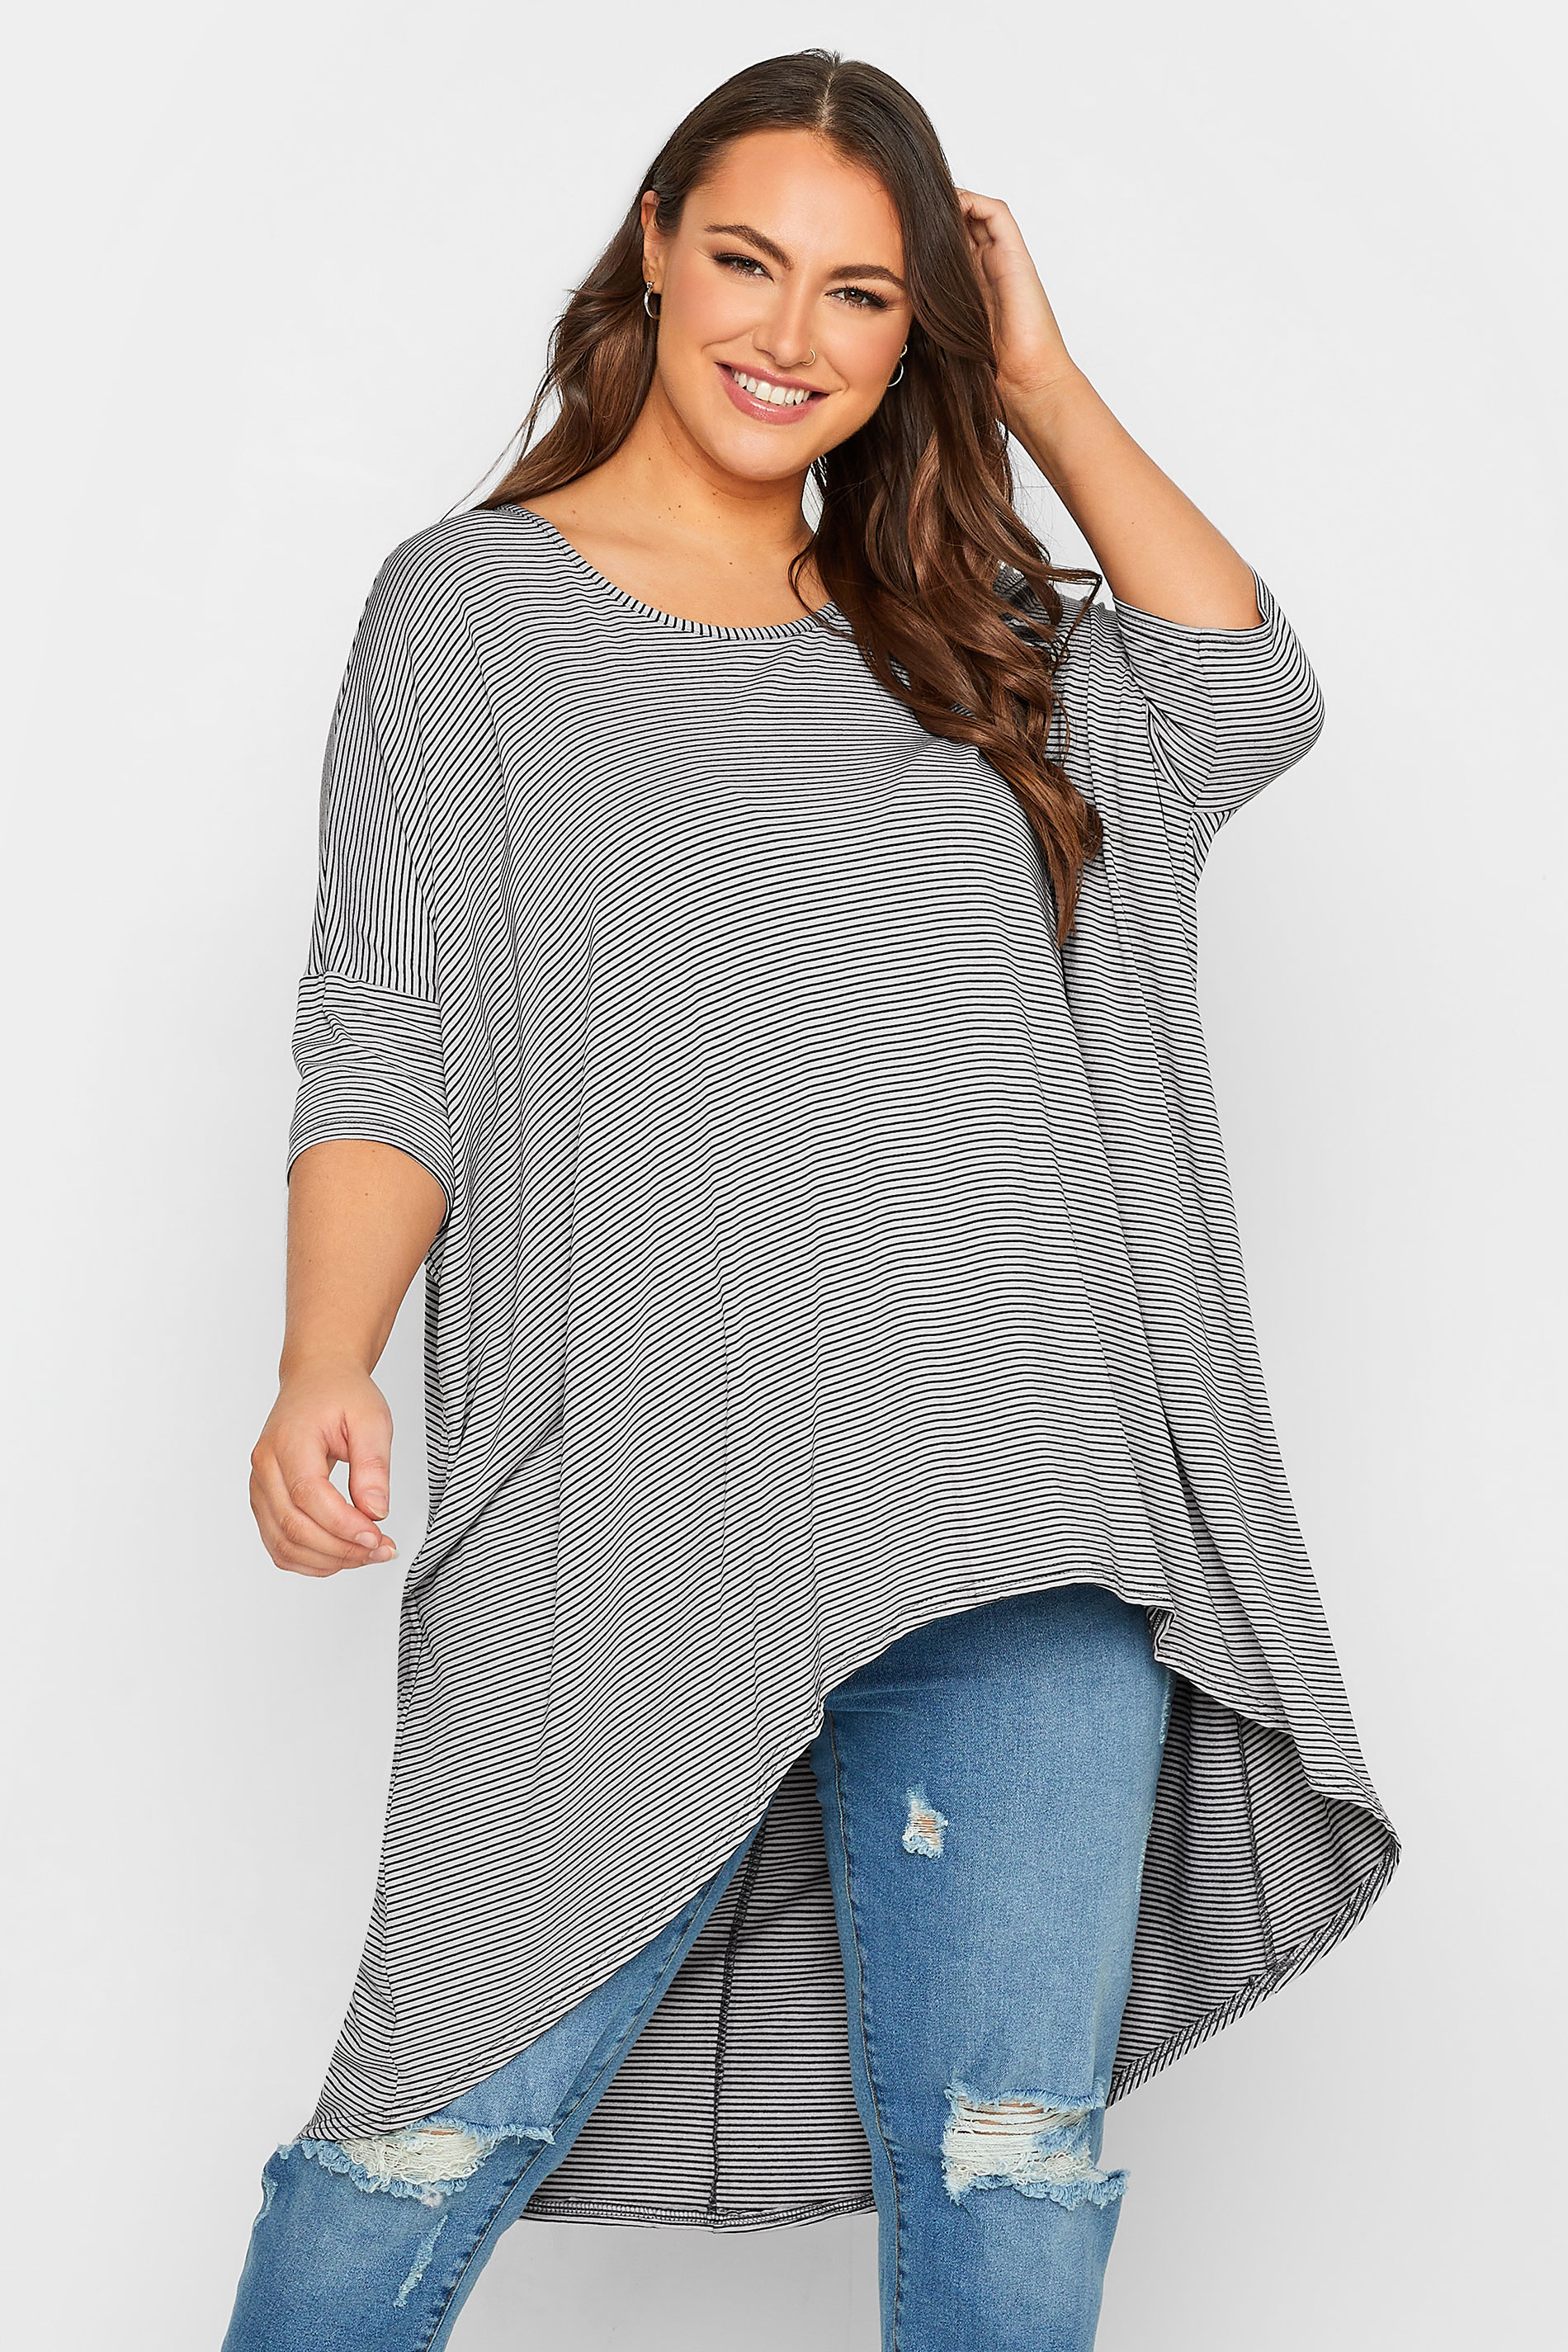 YOURS Plus Size Black & White Stripe Dipped Hem Tunic Top | Yours Clothing 1